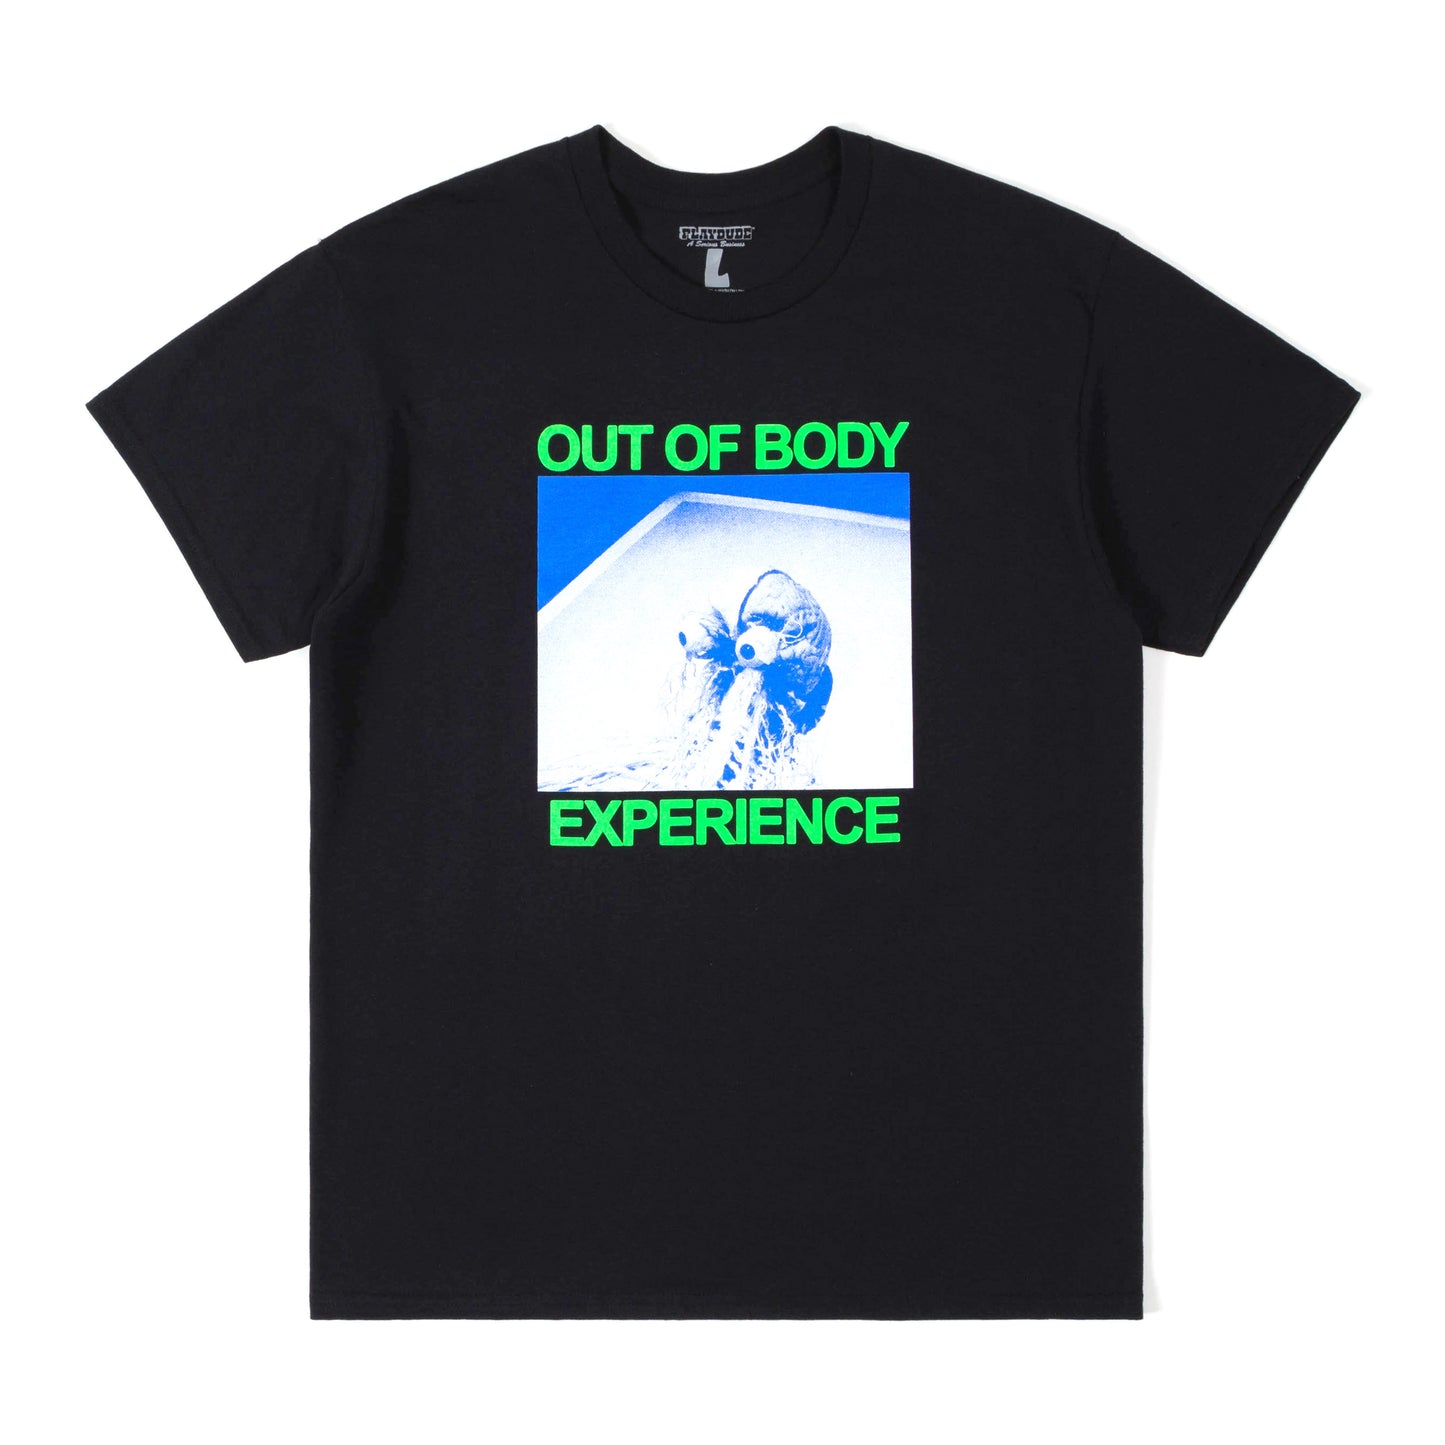 Out of Body Black T-Shirt from Playdude